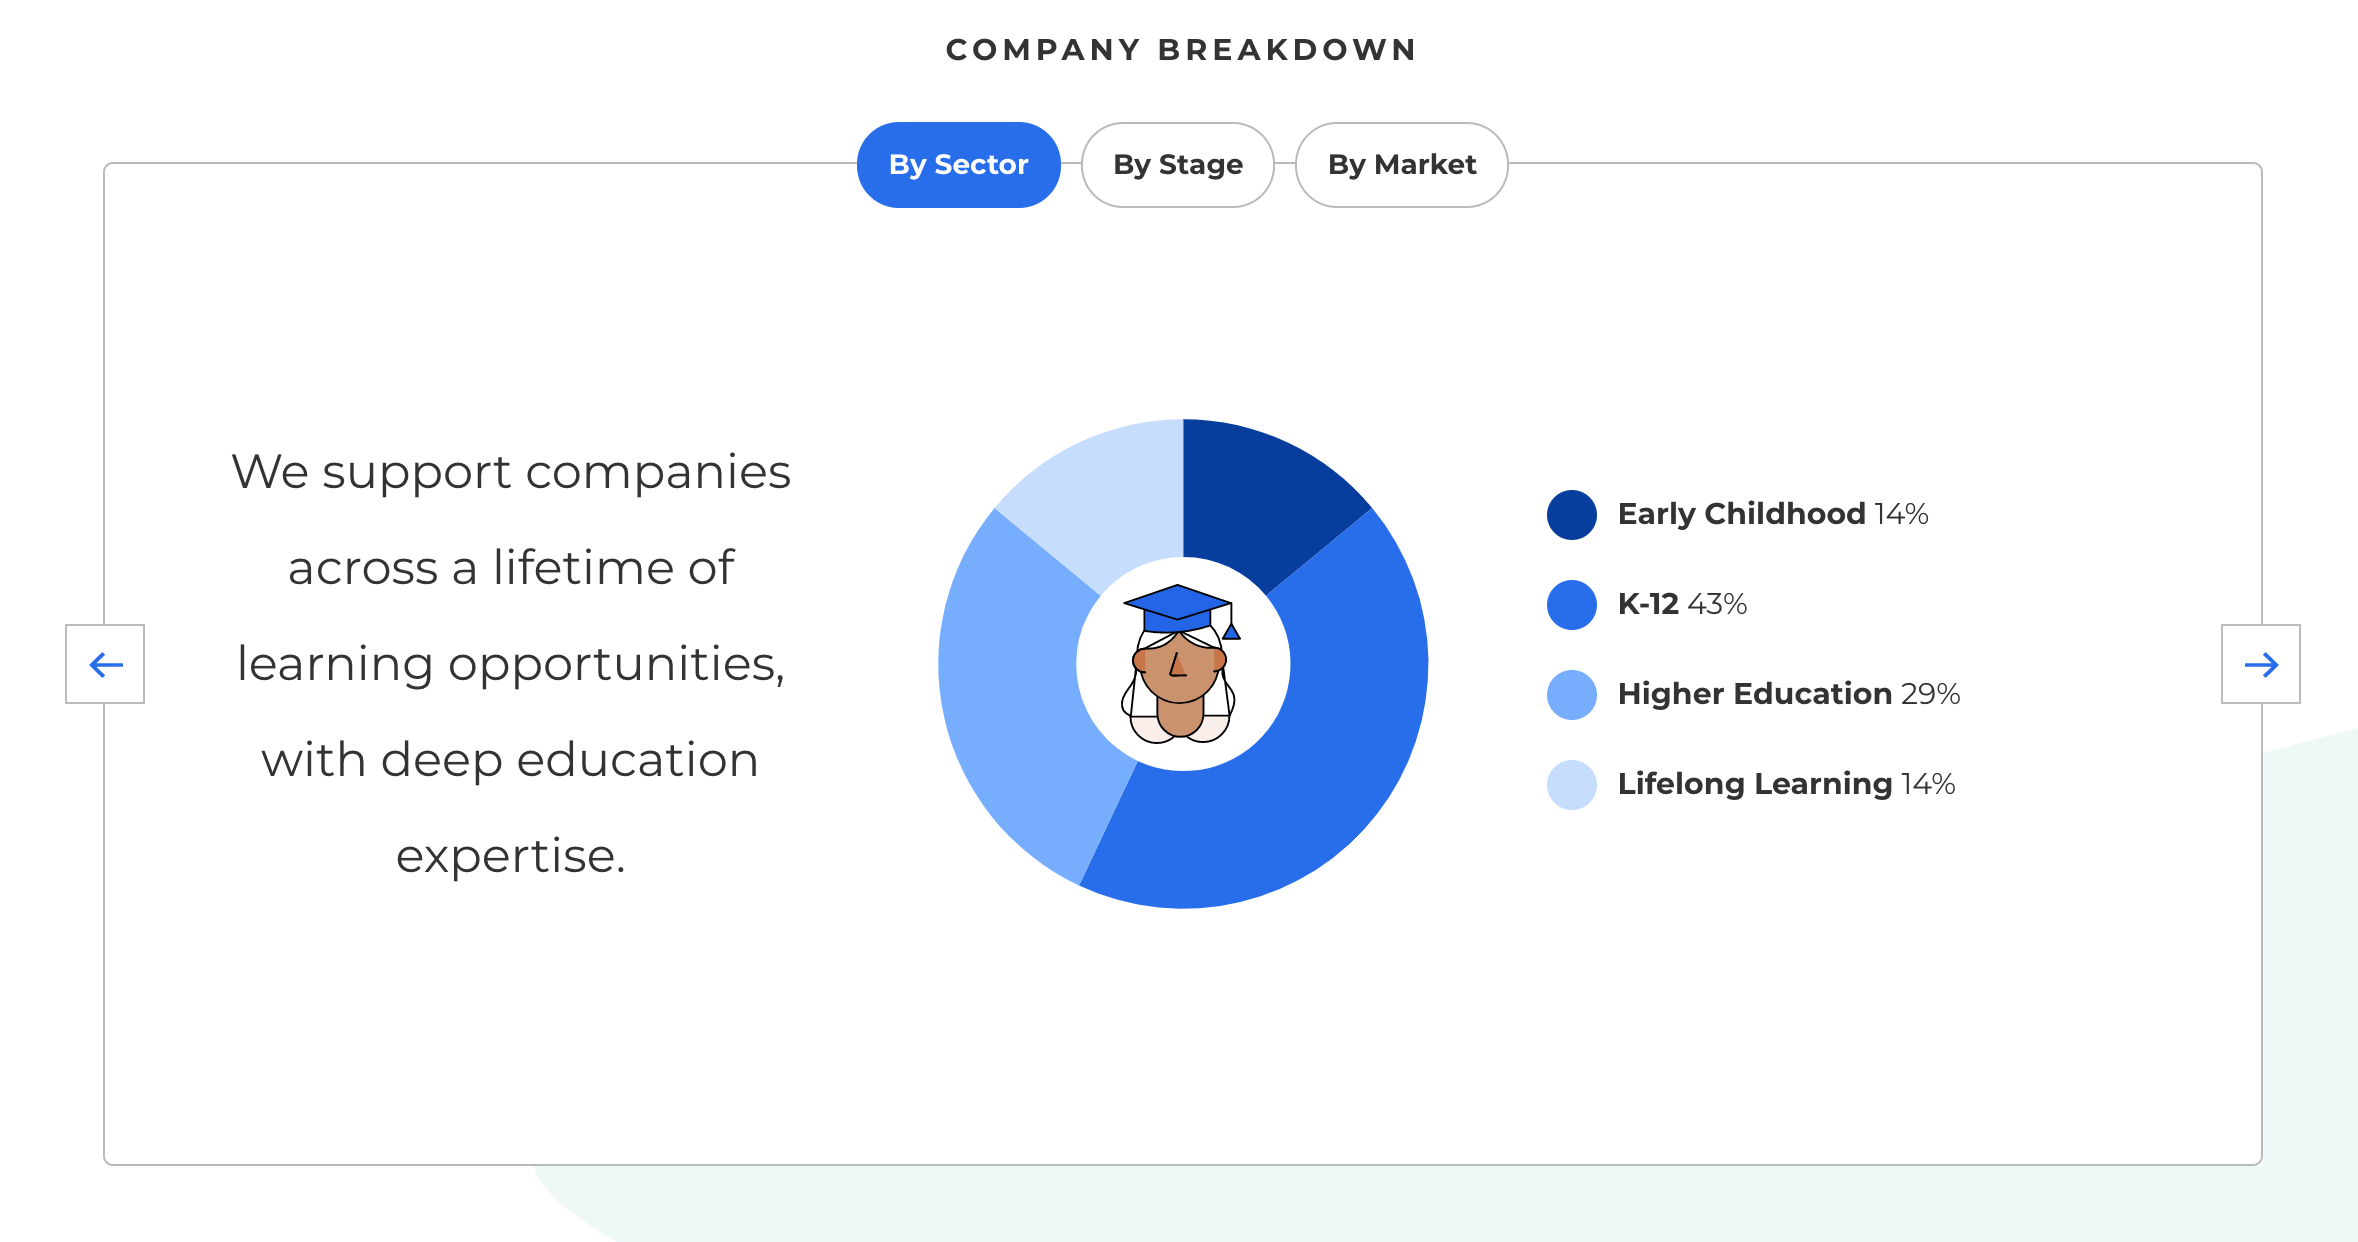 Pie chart showing company breakdown by sector, with K-12 making up 43%, higher ed at 29%, and lifelong learning and early childhood at 14% each.